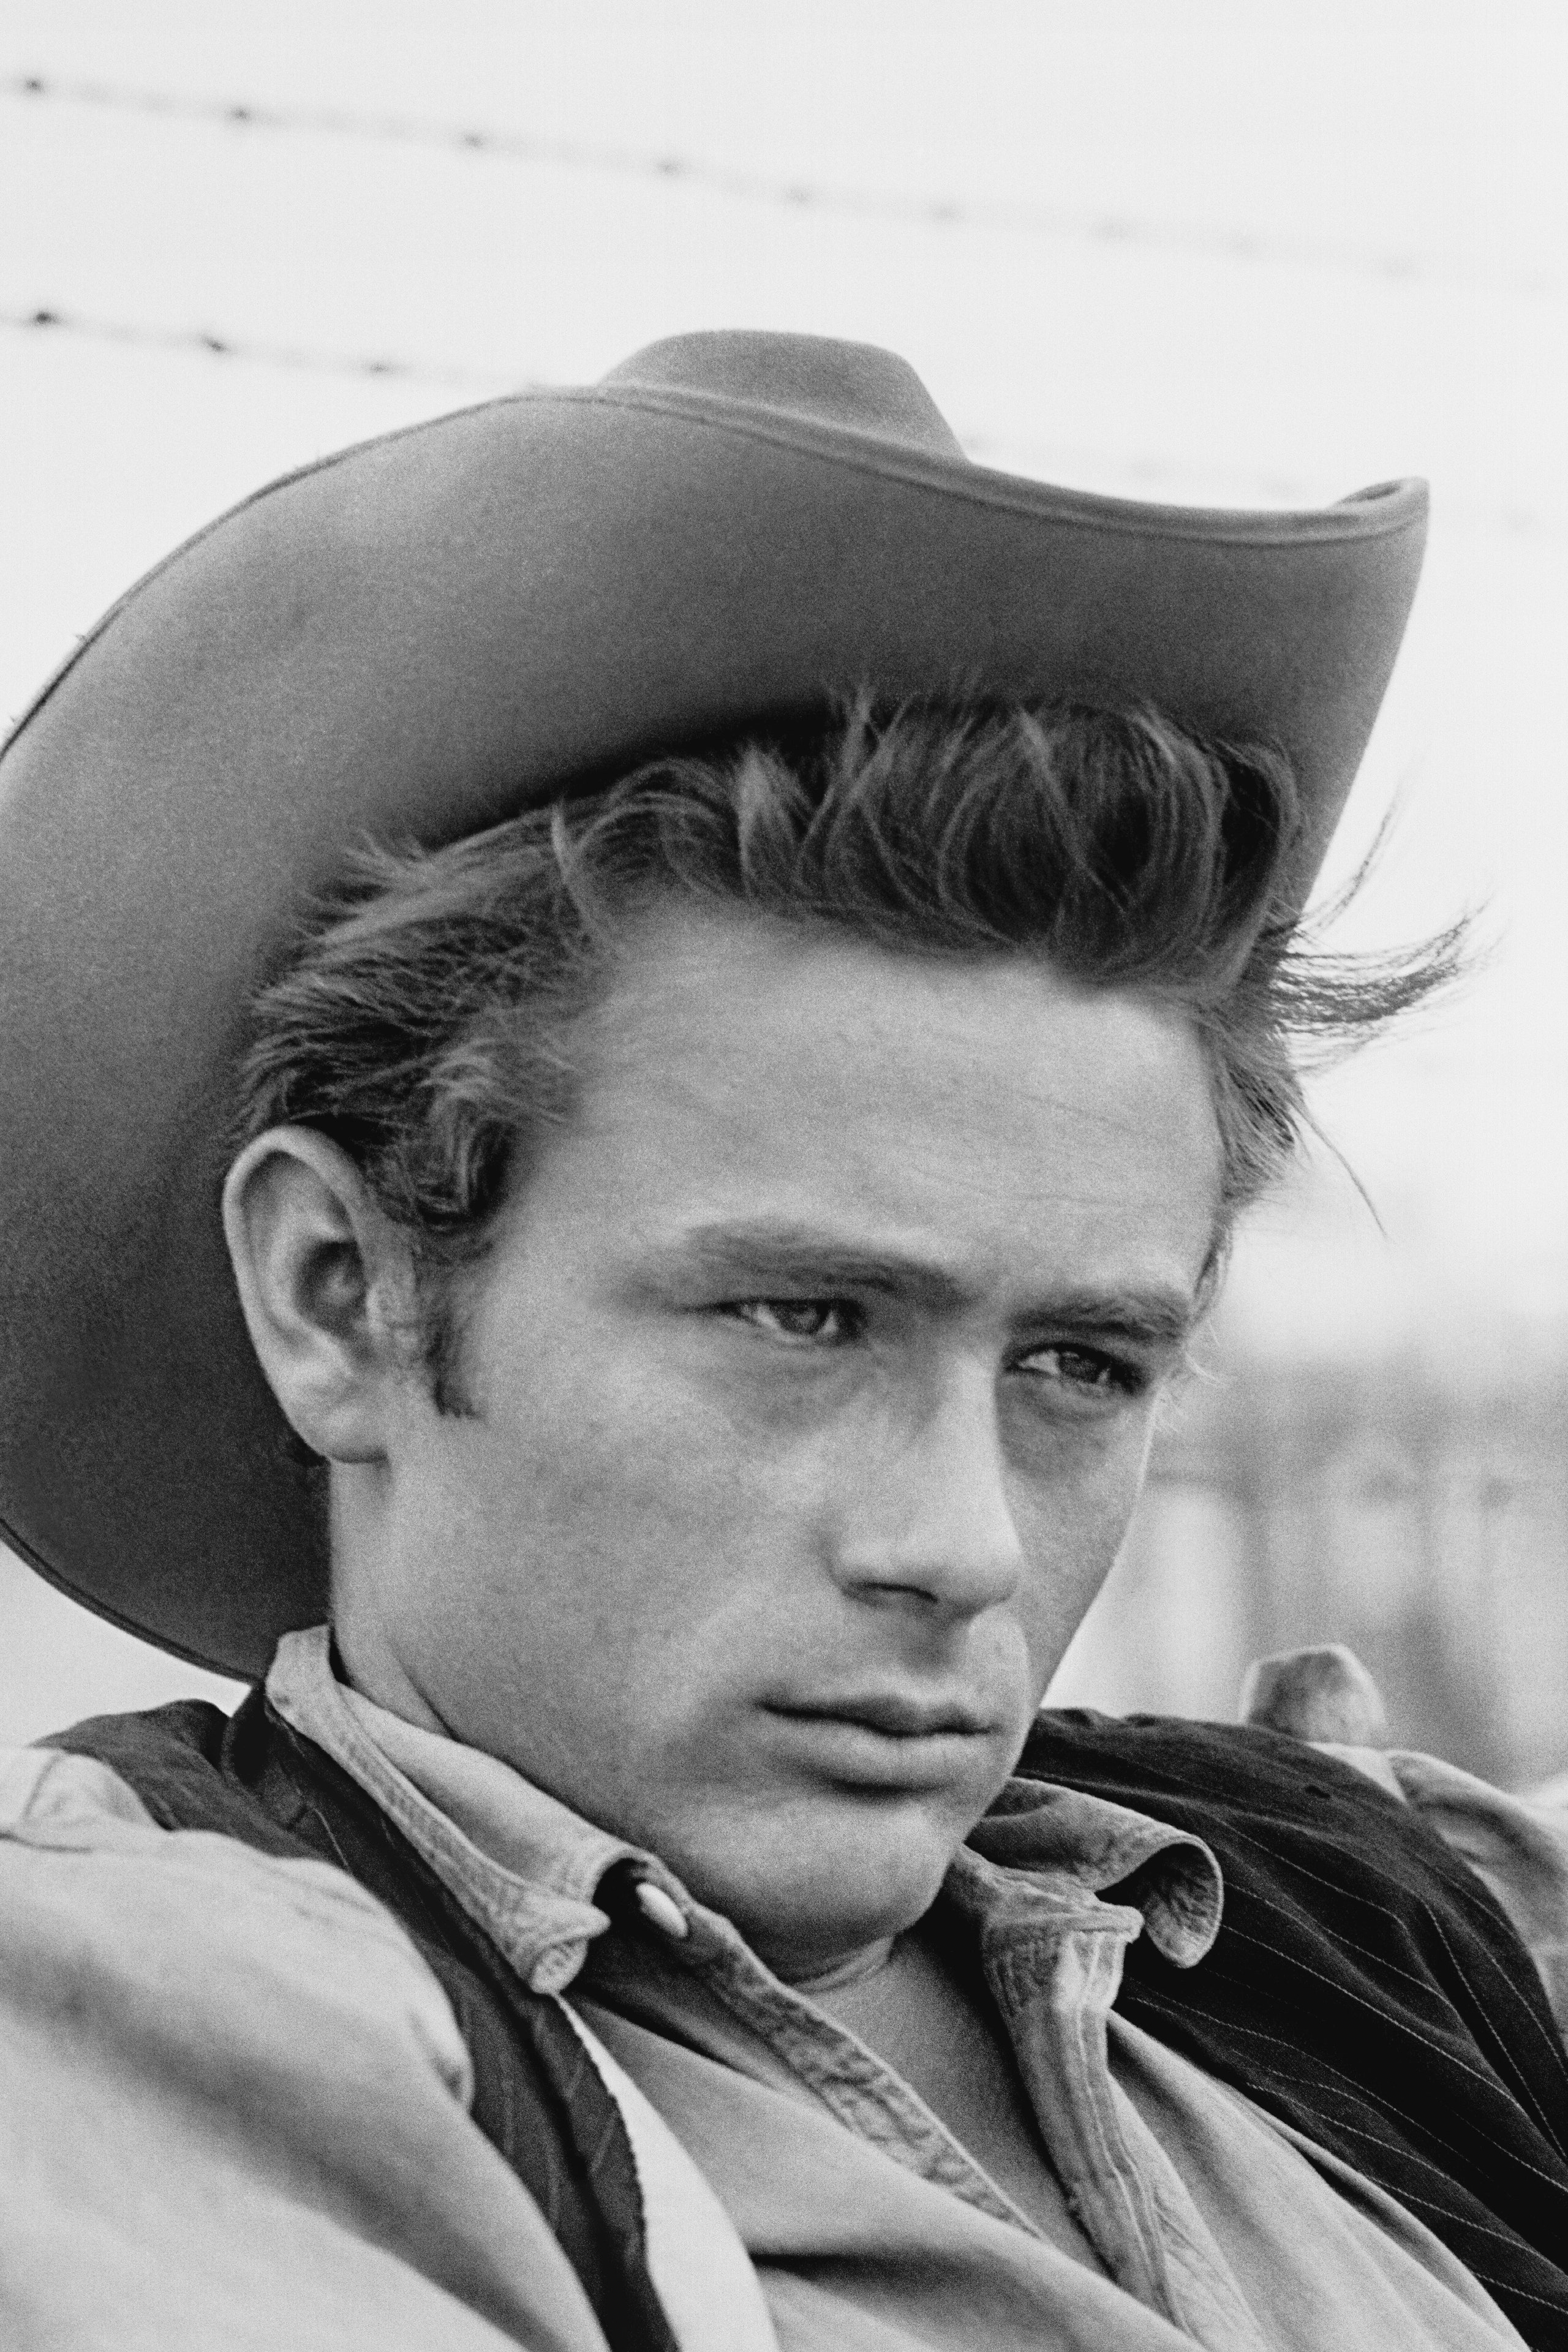 MARFA TX  July 1955  Actor James Dean on the set of the movie Giant in July 1955 in Marfa Texas.